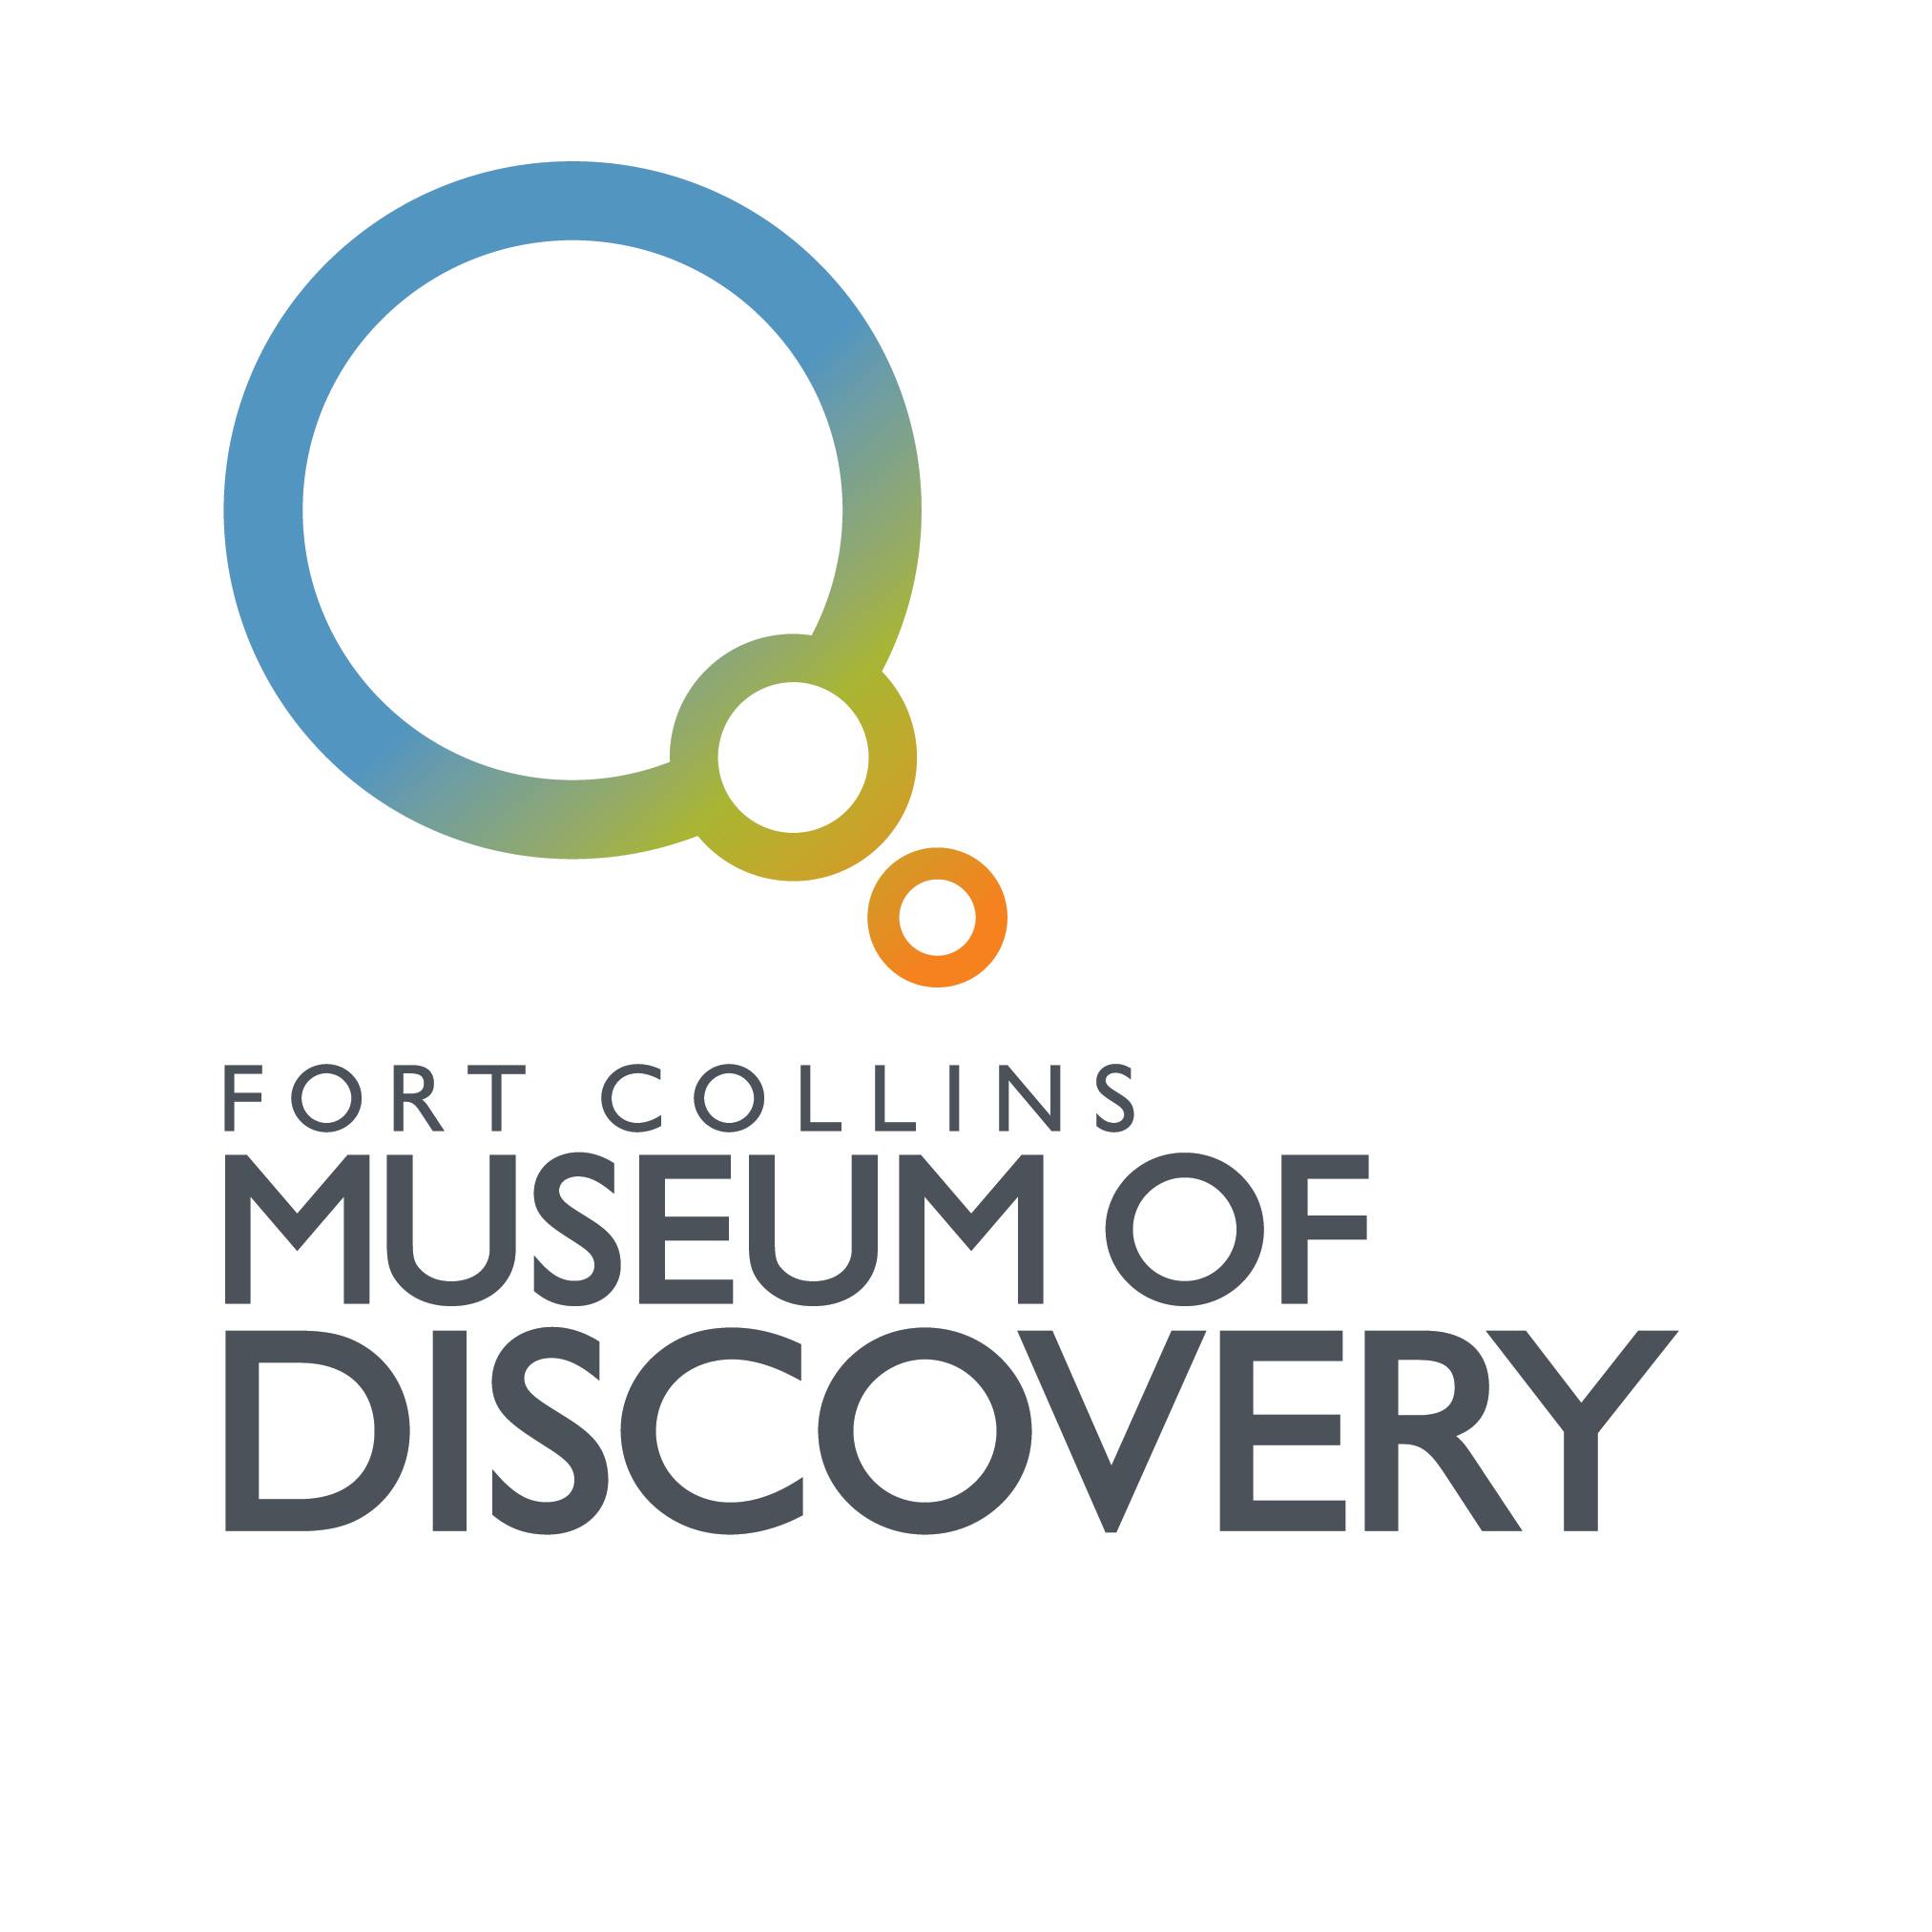 Fort Collins Museum of Discovery - Logo